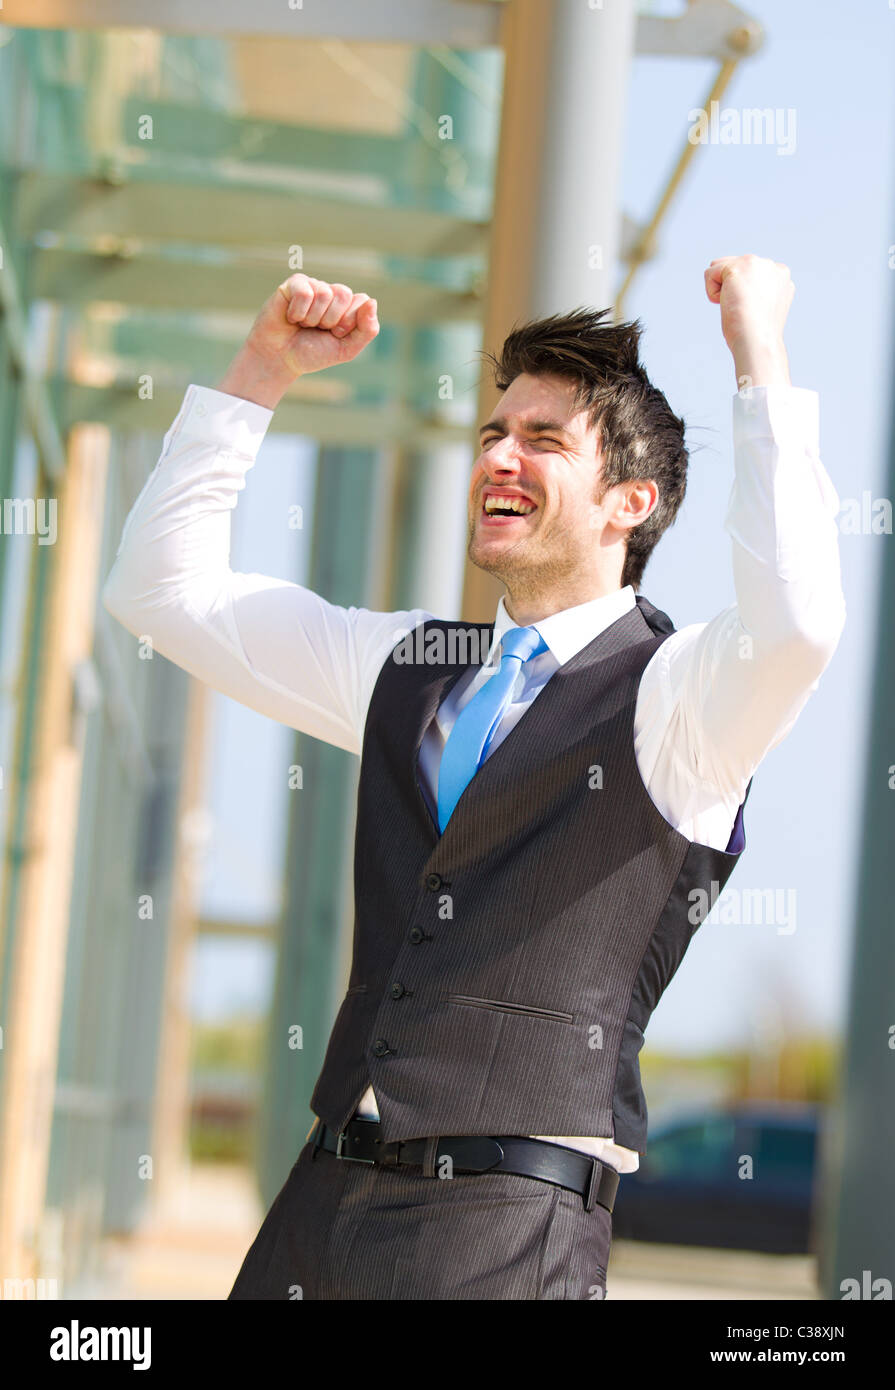 Man with arms in the air Stock Photo